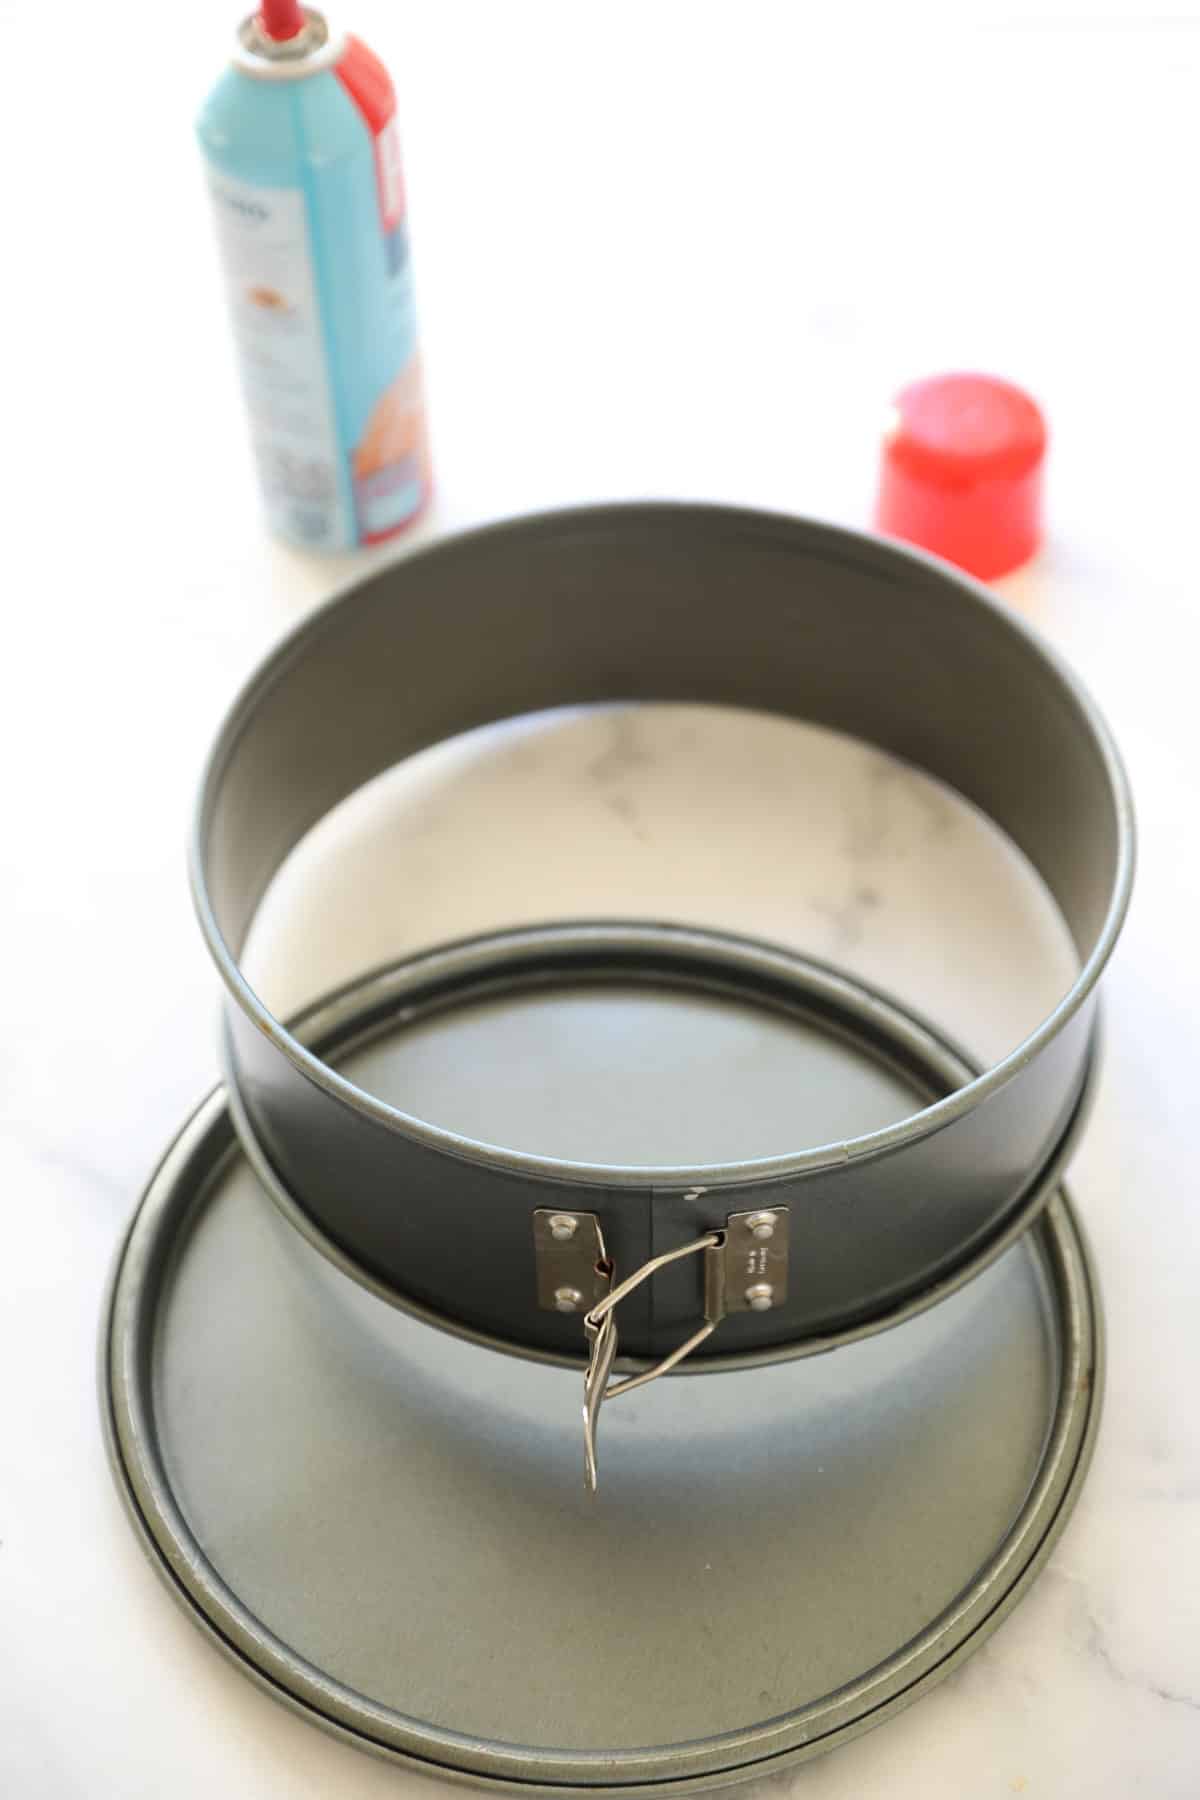 a cheesecake pan opened to show ring and baking spray